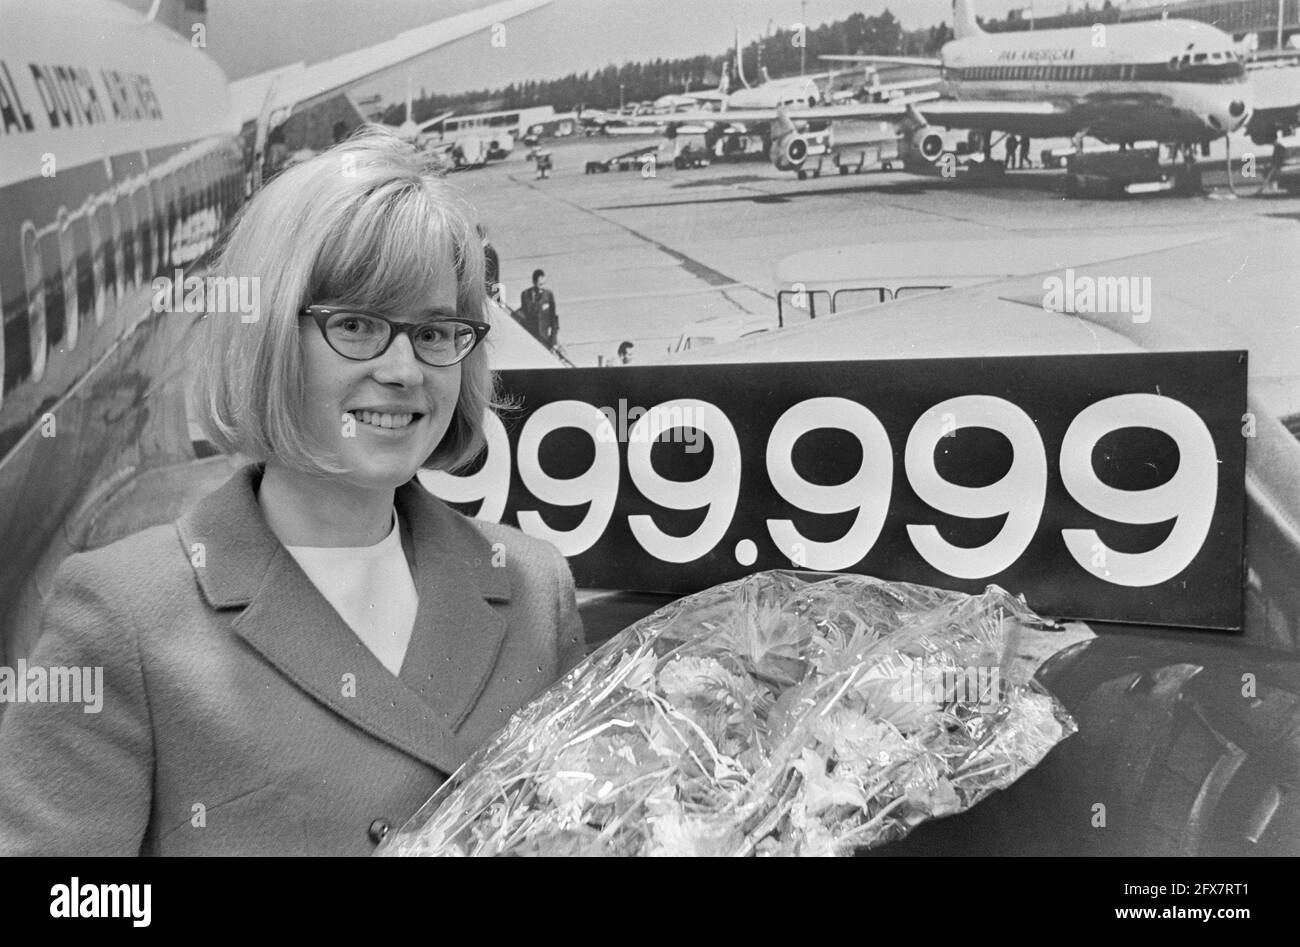 999,999th KLM passenger, Anke Dellin from Garding (Germany) at Schiphol Airport, July 21, 1966, passengers, The Netherlands, 20th century press agency photo, news to remember, documentary, historic photography 1945-1990, visual stories, human history of the Twentieth Century, capturing moments in time Stock Photo